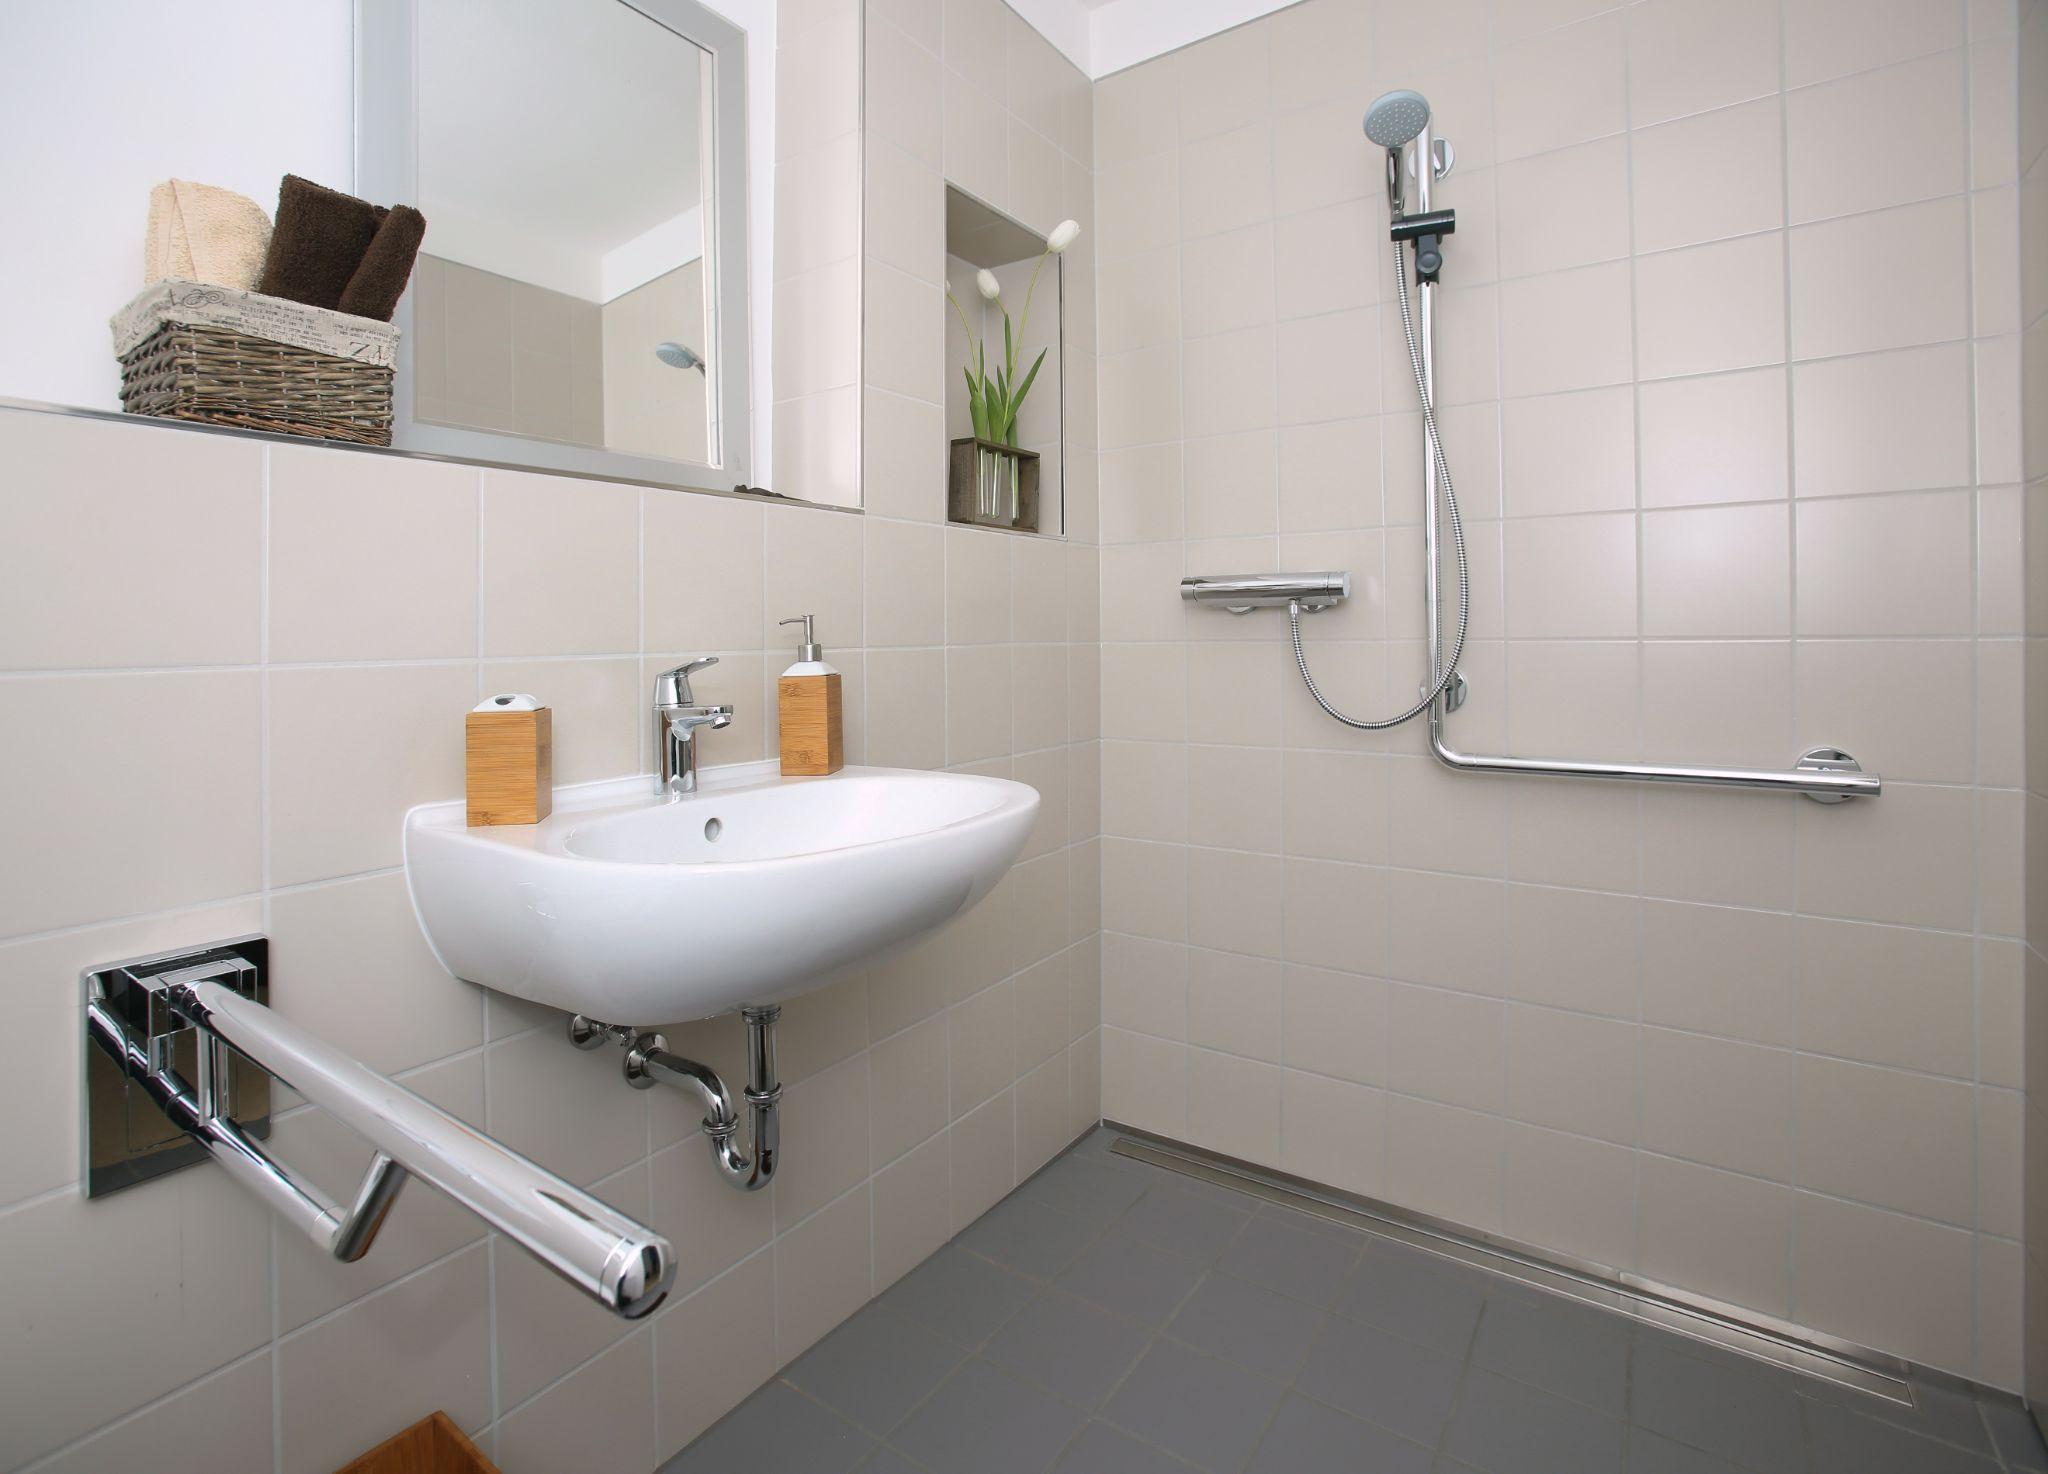 New remodeled senior-friendly and handicap-accessible bathroom